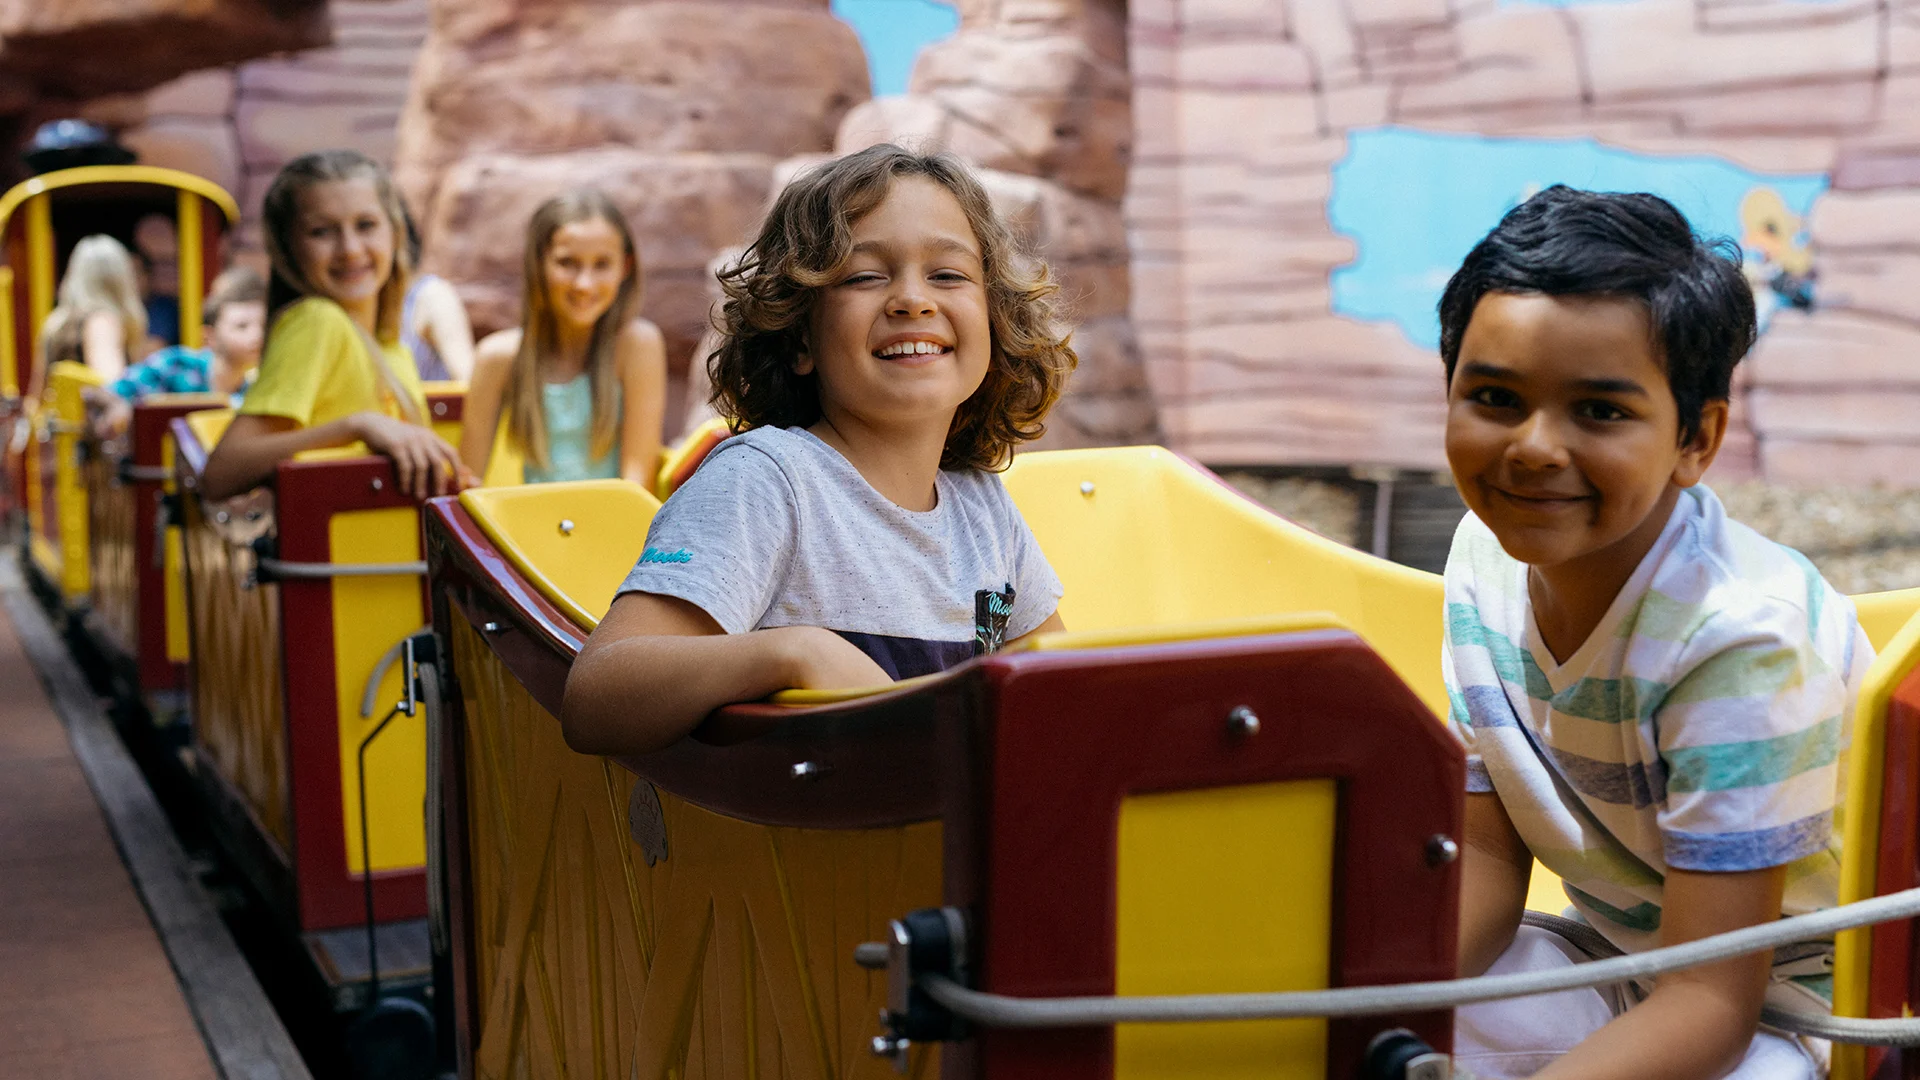 Children laughing and having fun on the Yosemite Sam Railroad kids ride at Warner Bros. Movie World, with a colorful train and playful expressions, capturing the joy and excitement of the theme park experience for kids